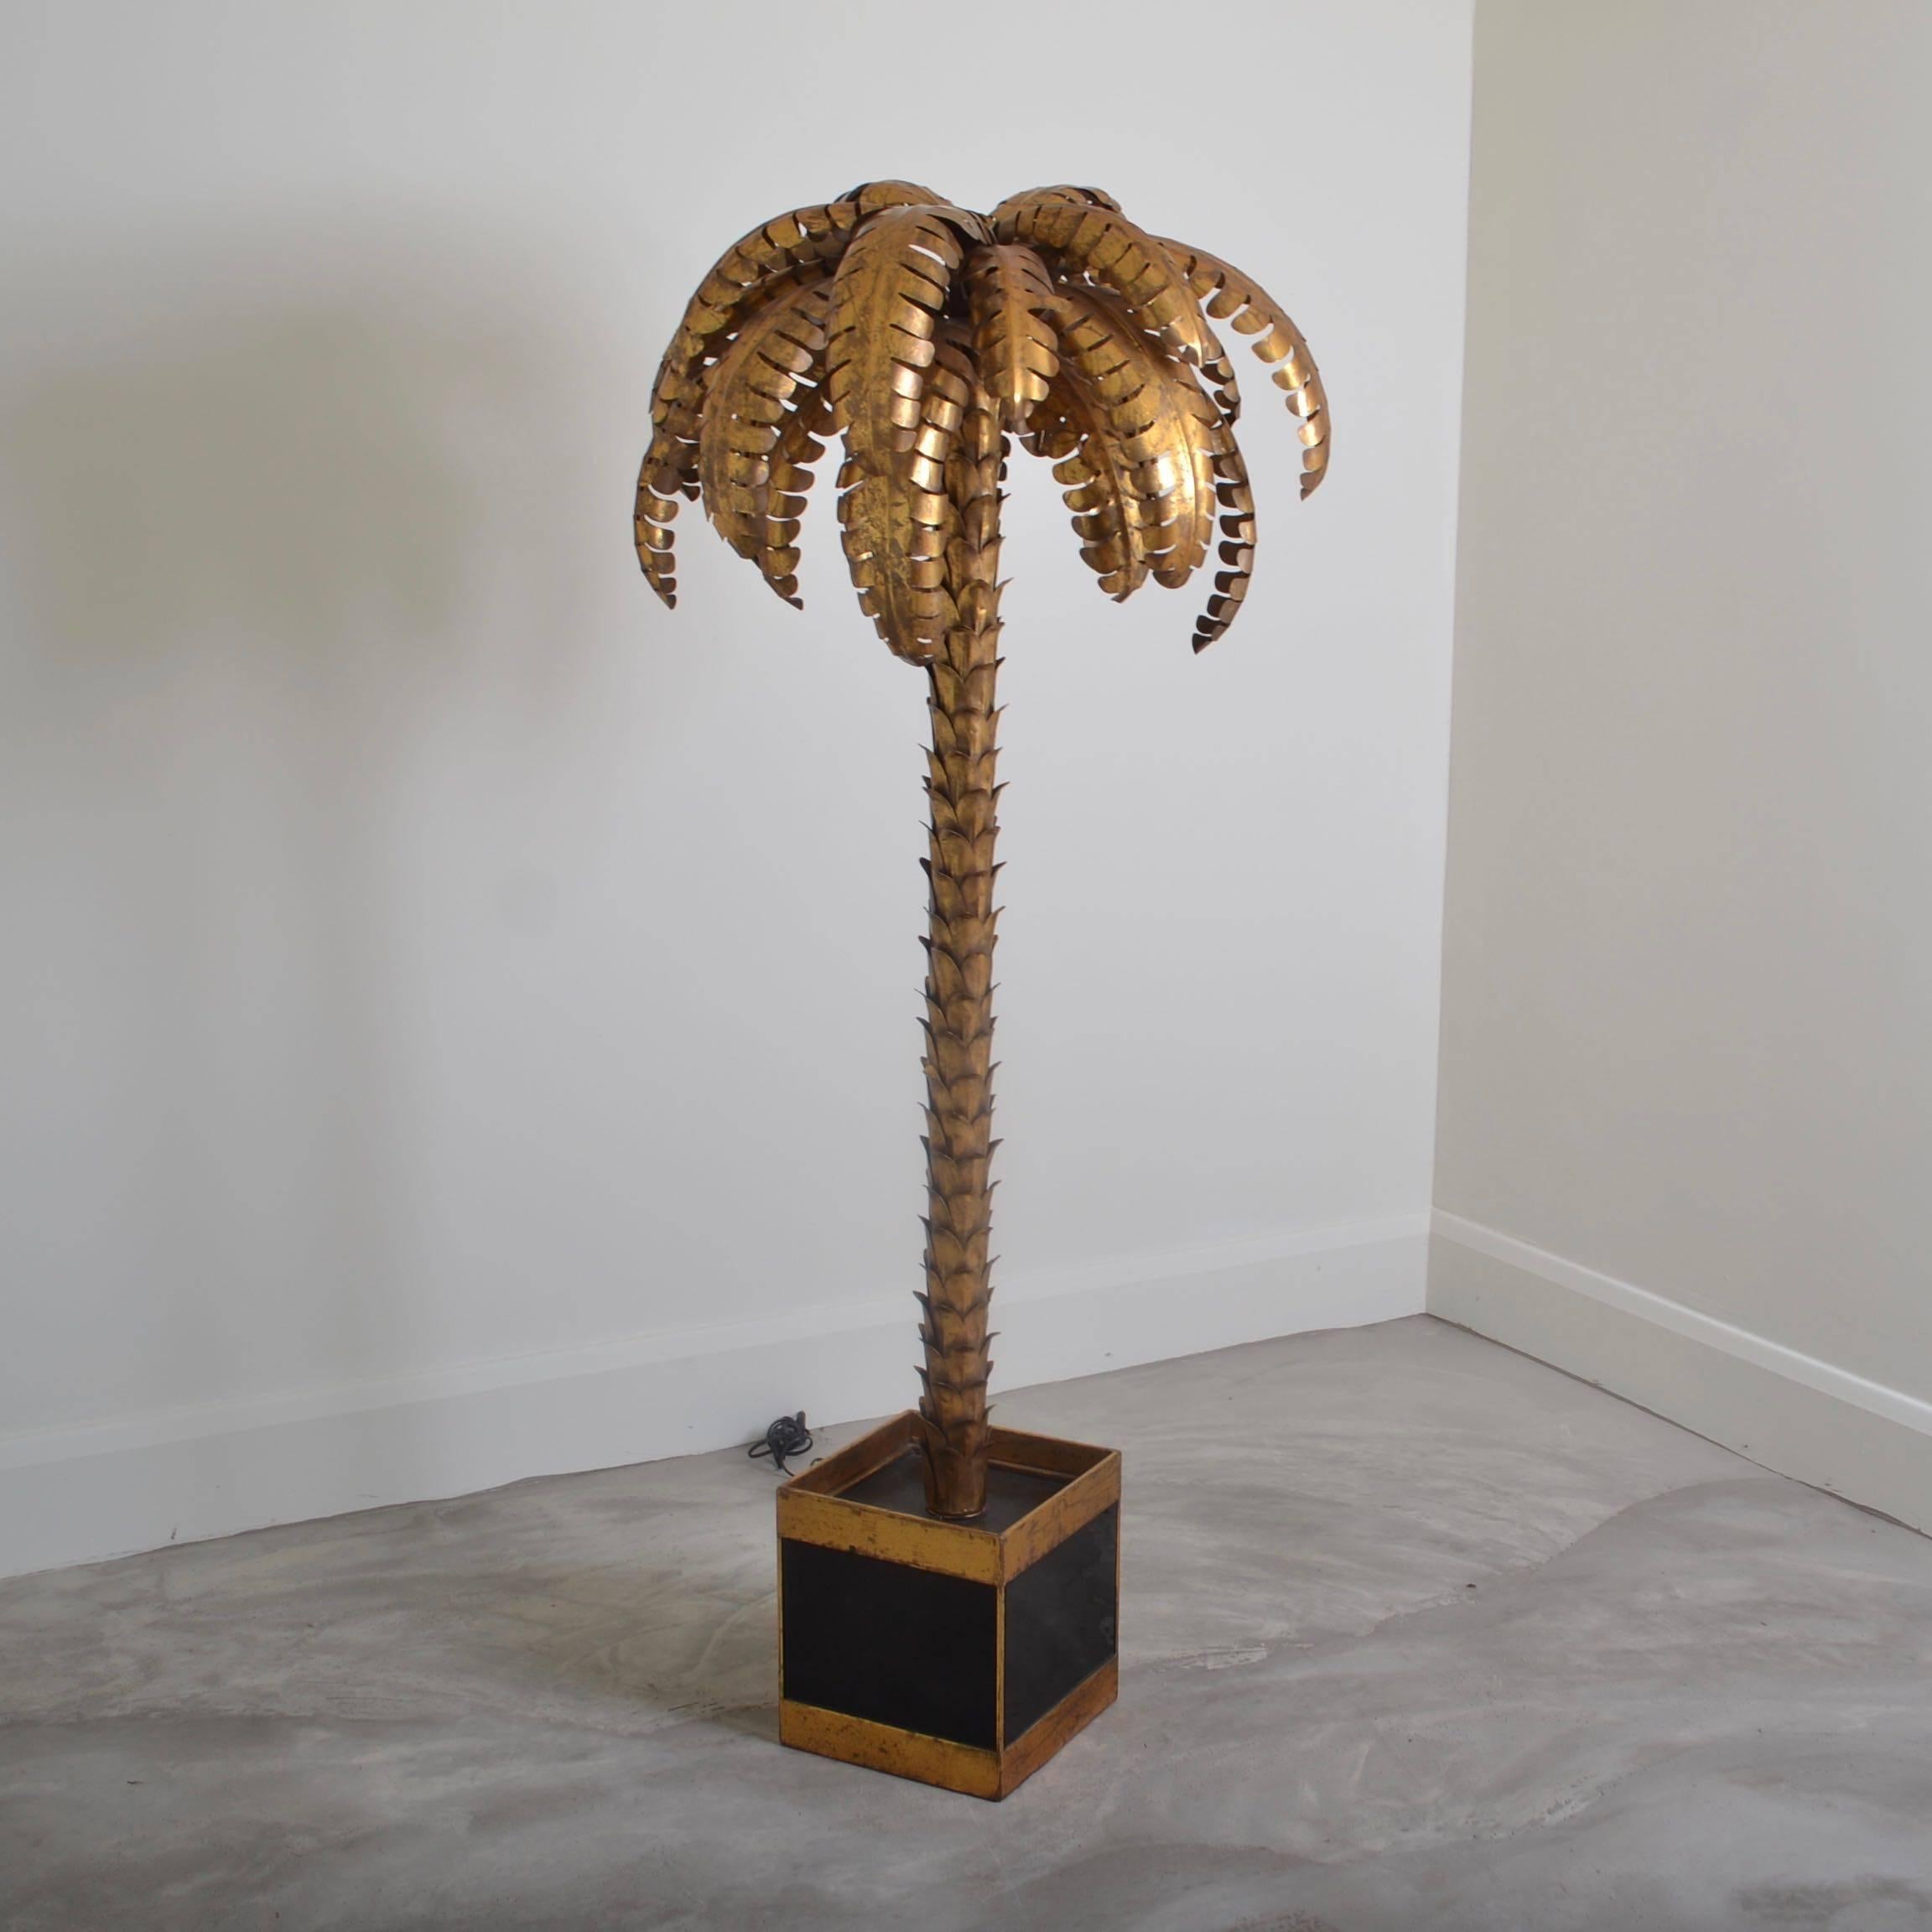 Six foot high palm tree floor lamp.
Gilt metal palm tree with black painted iron and glass base.
Two concealed bulbs within the palm fronds.
Exceptional size and elegant shape.
     